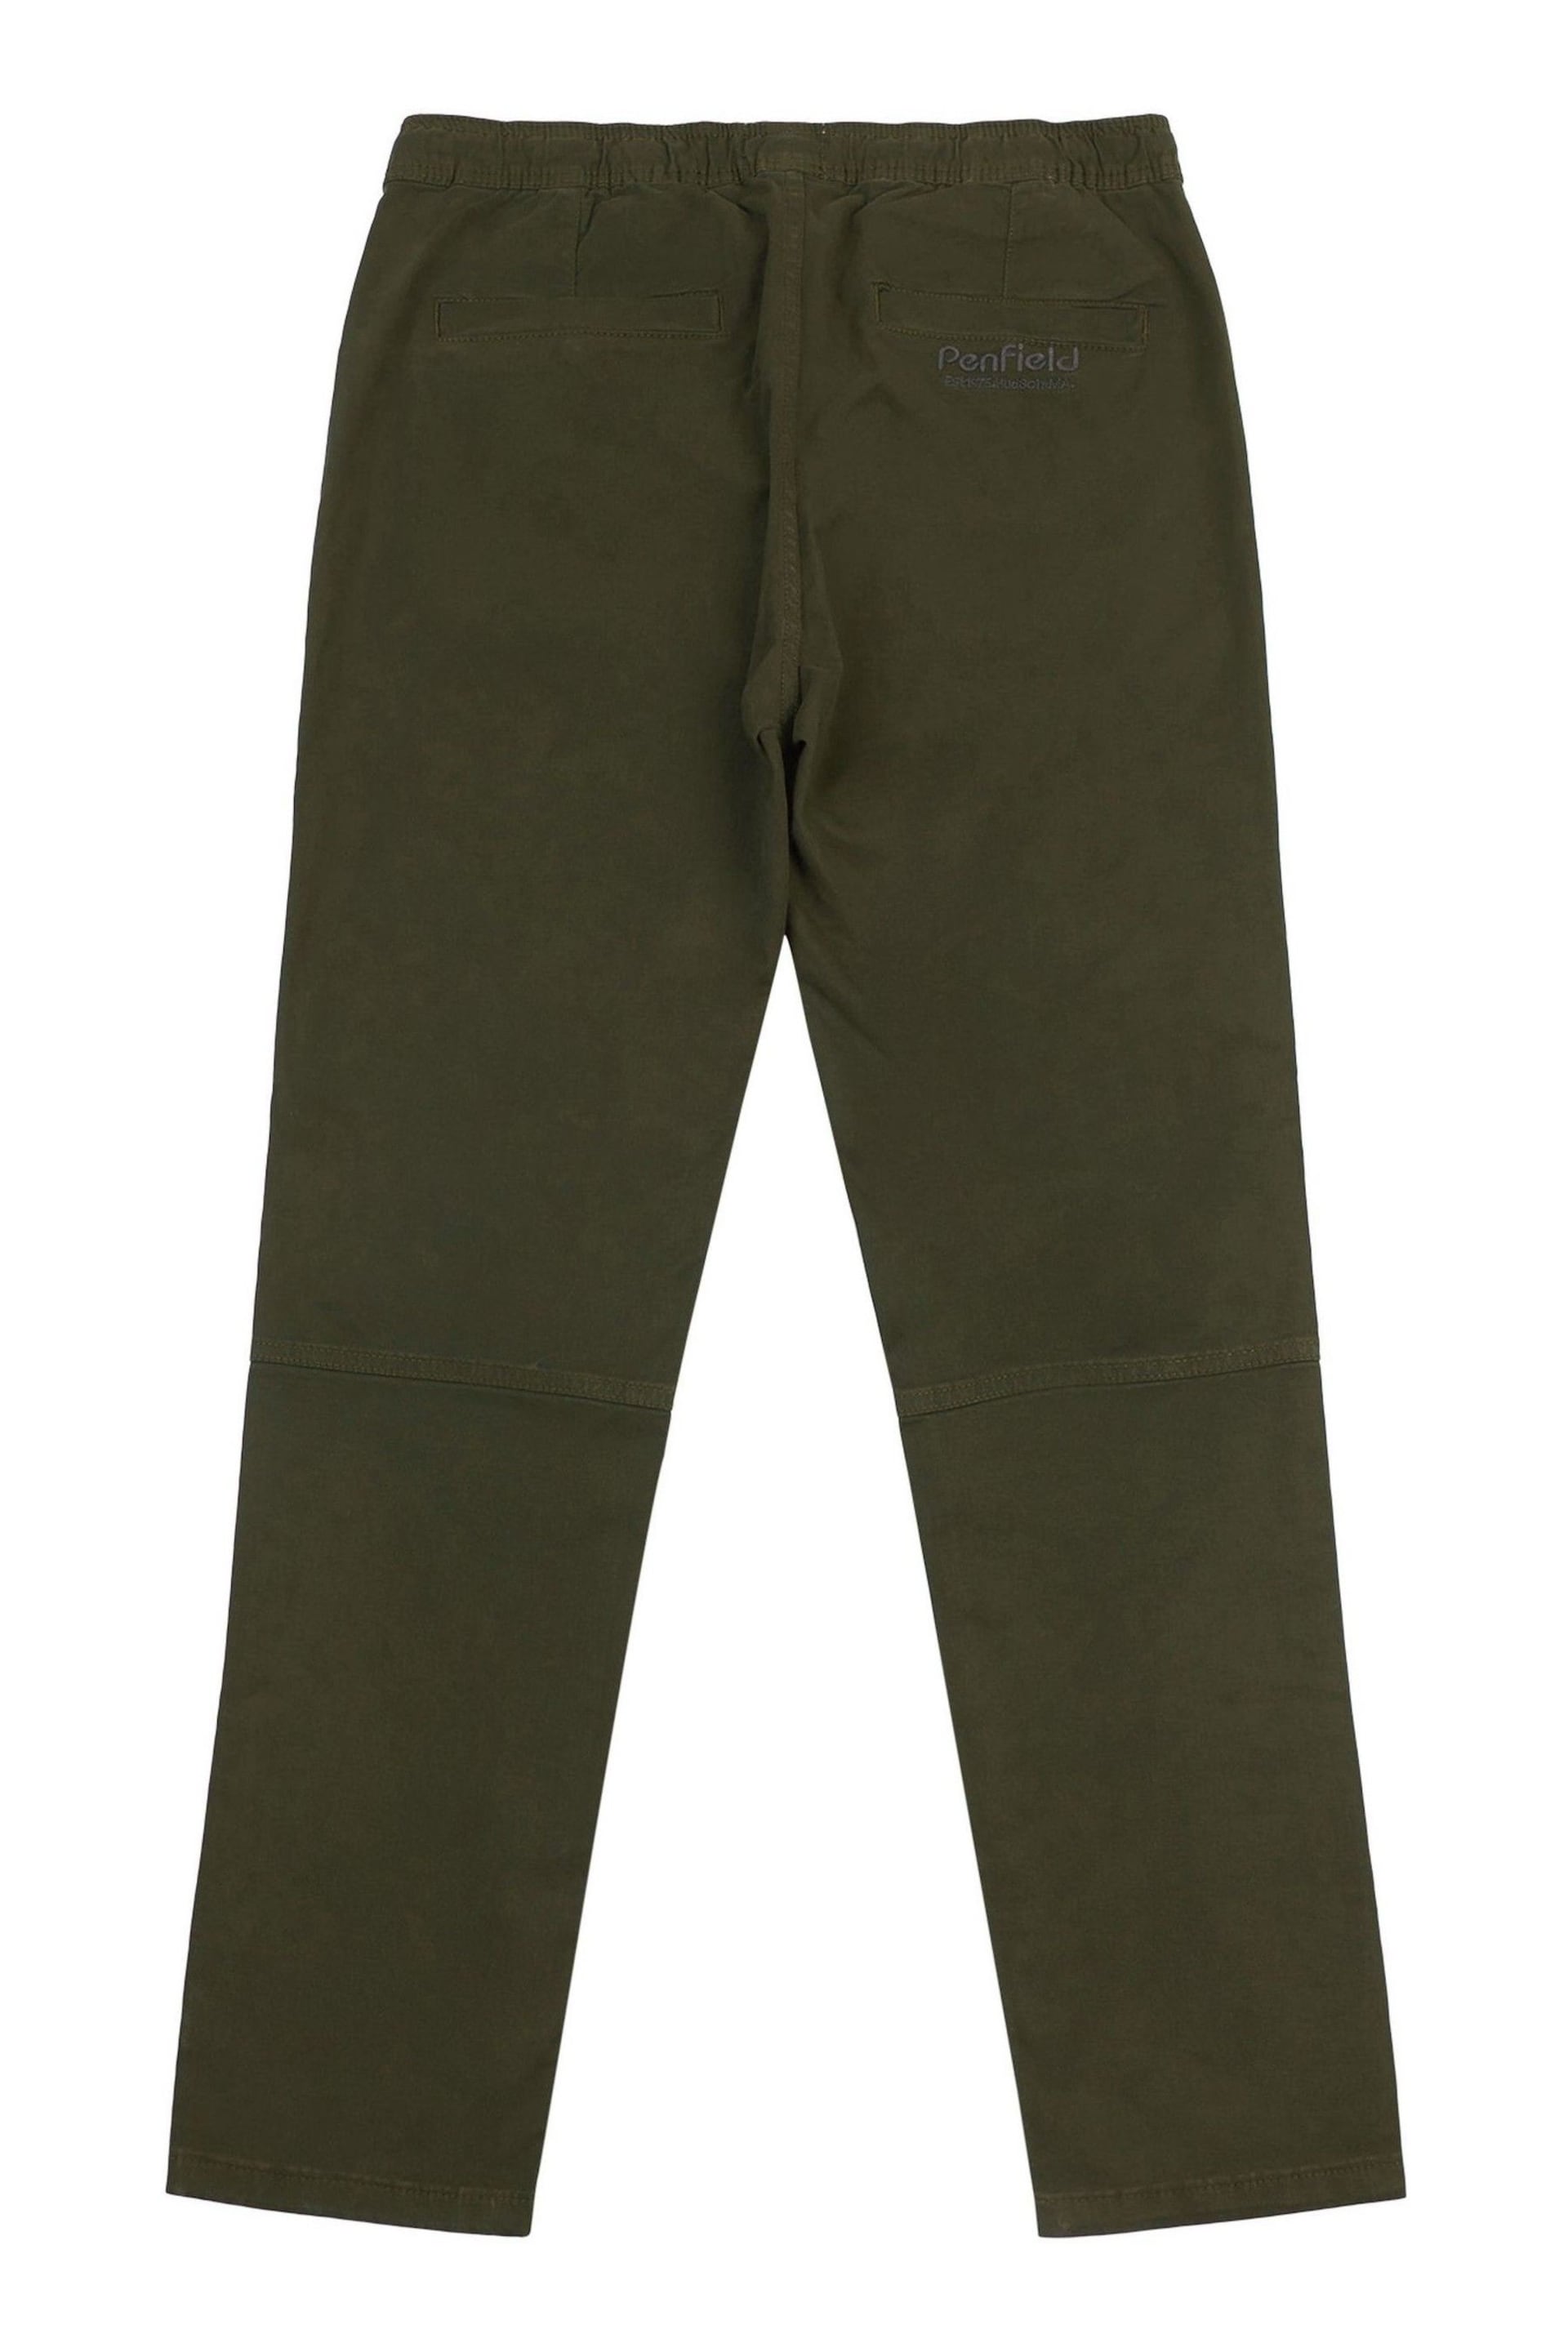 Penfield Green Hudson Script Elasticated Waist Trousers - Image 5 of 7